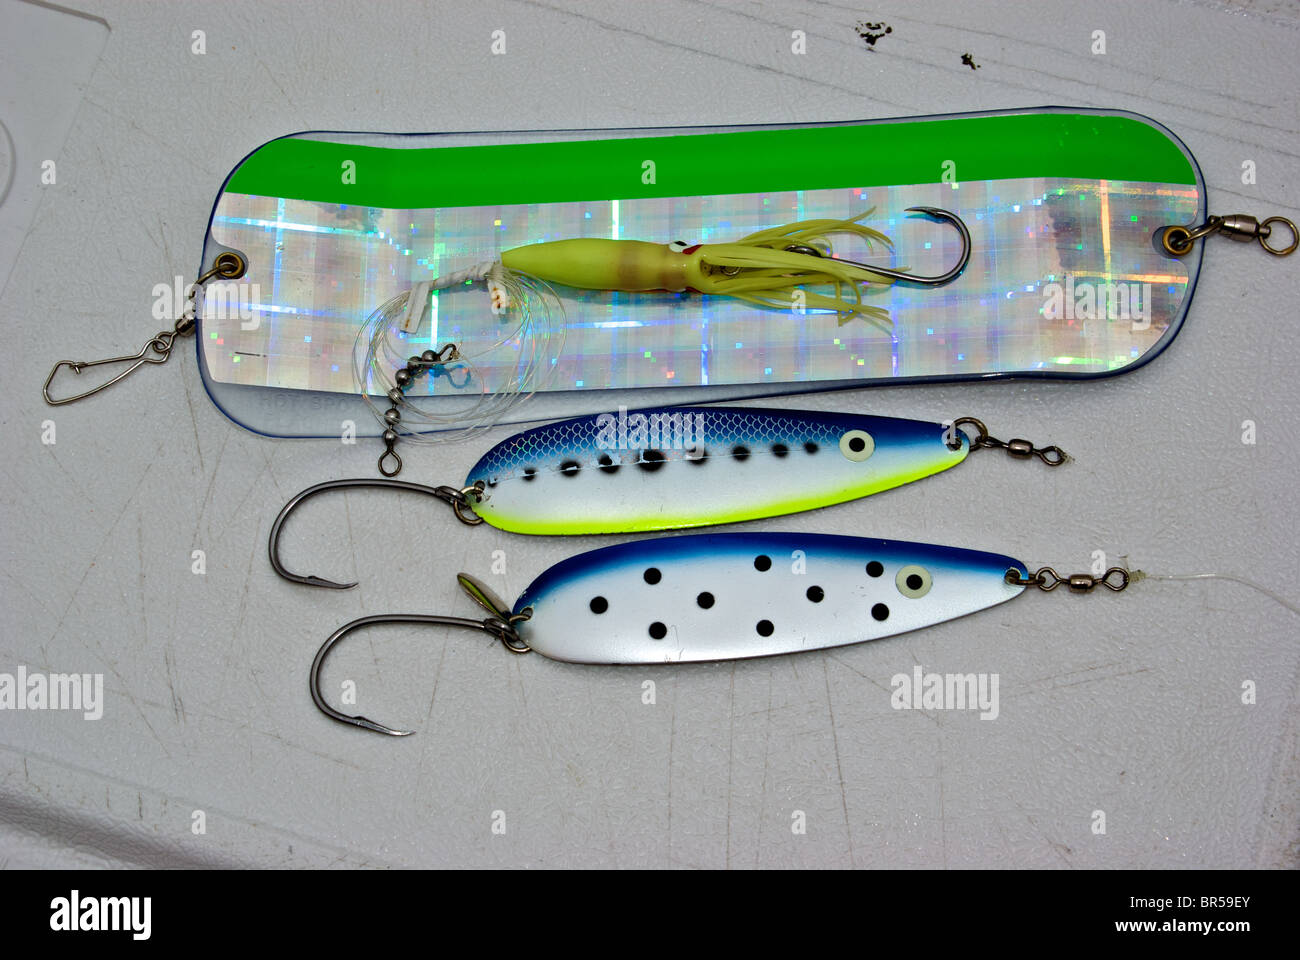 Salmon and halibut trolling lures spoon hoochie fishing lures with rotating  attractor flasher Stock Photo - Alamy